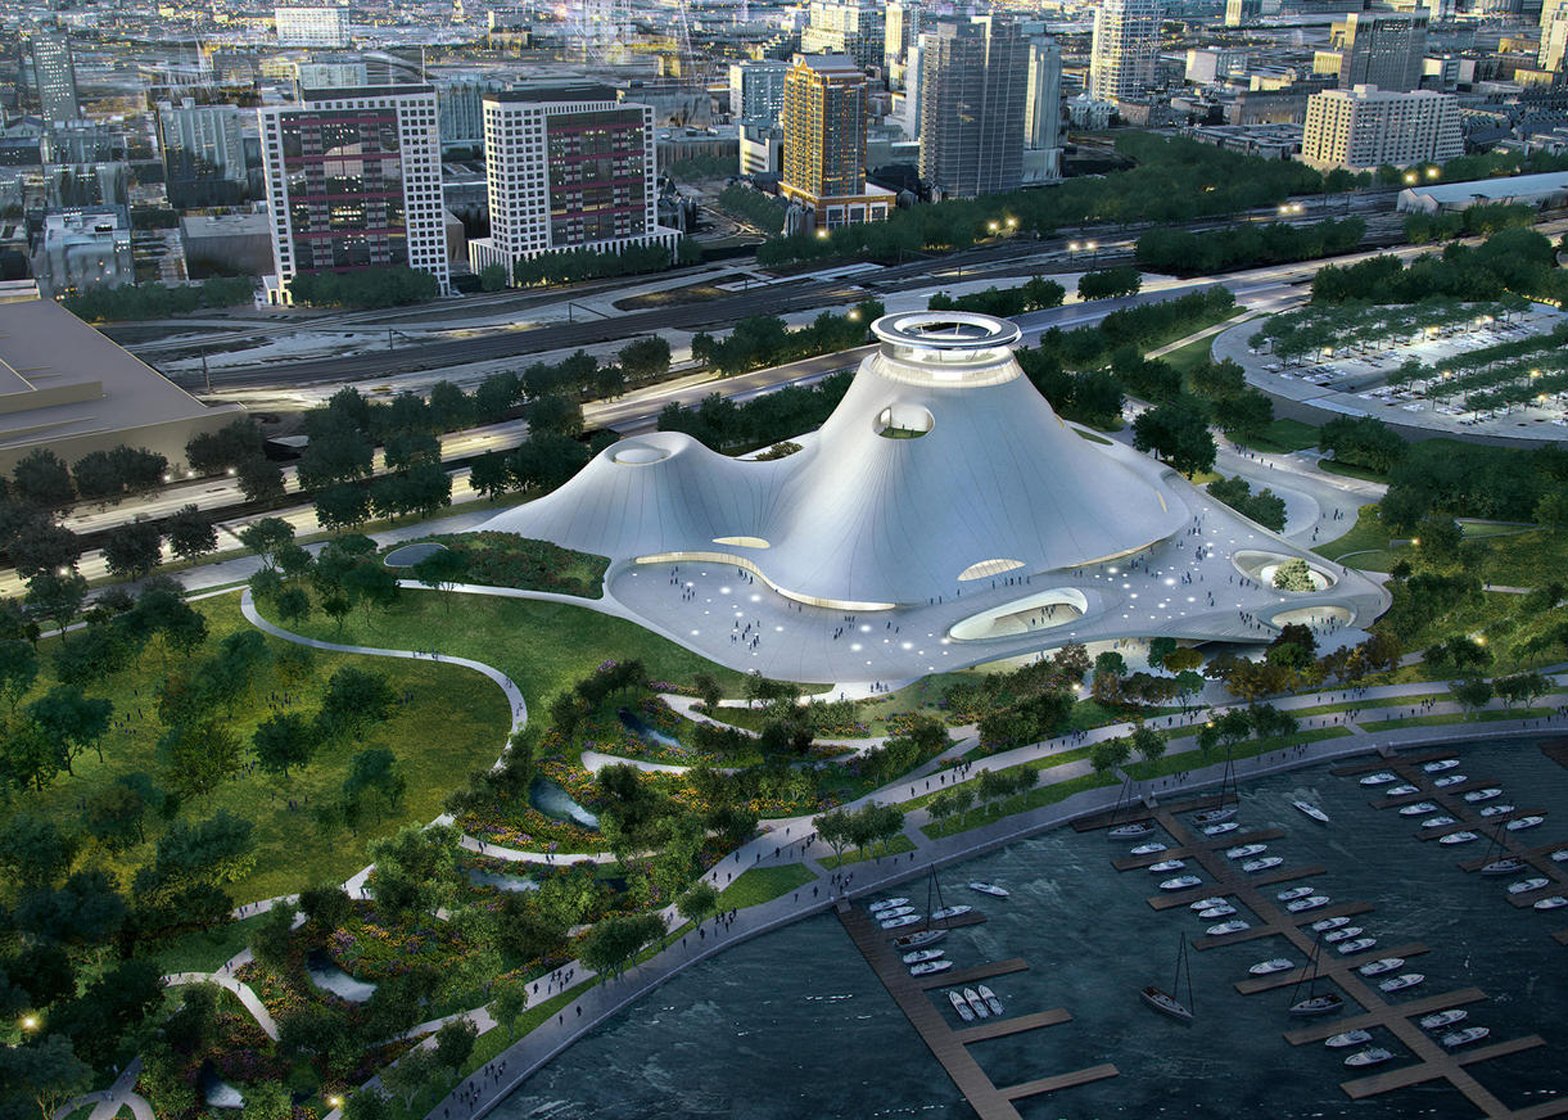 Lucas museum by MAD